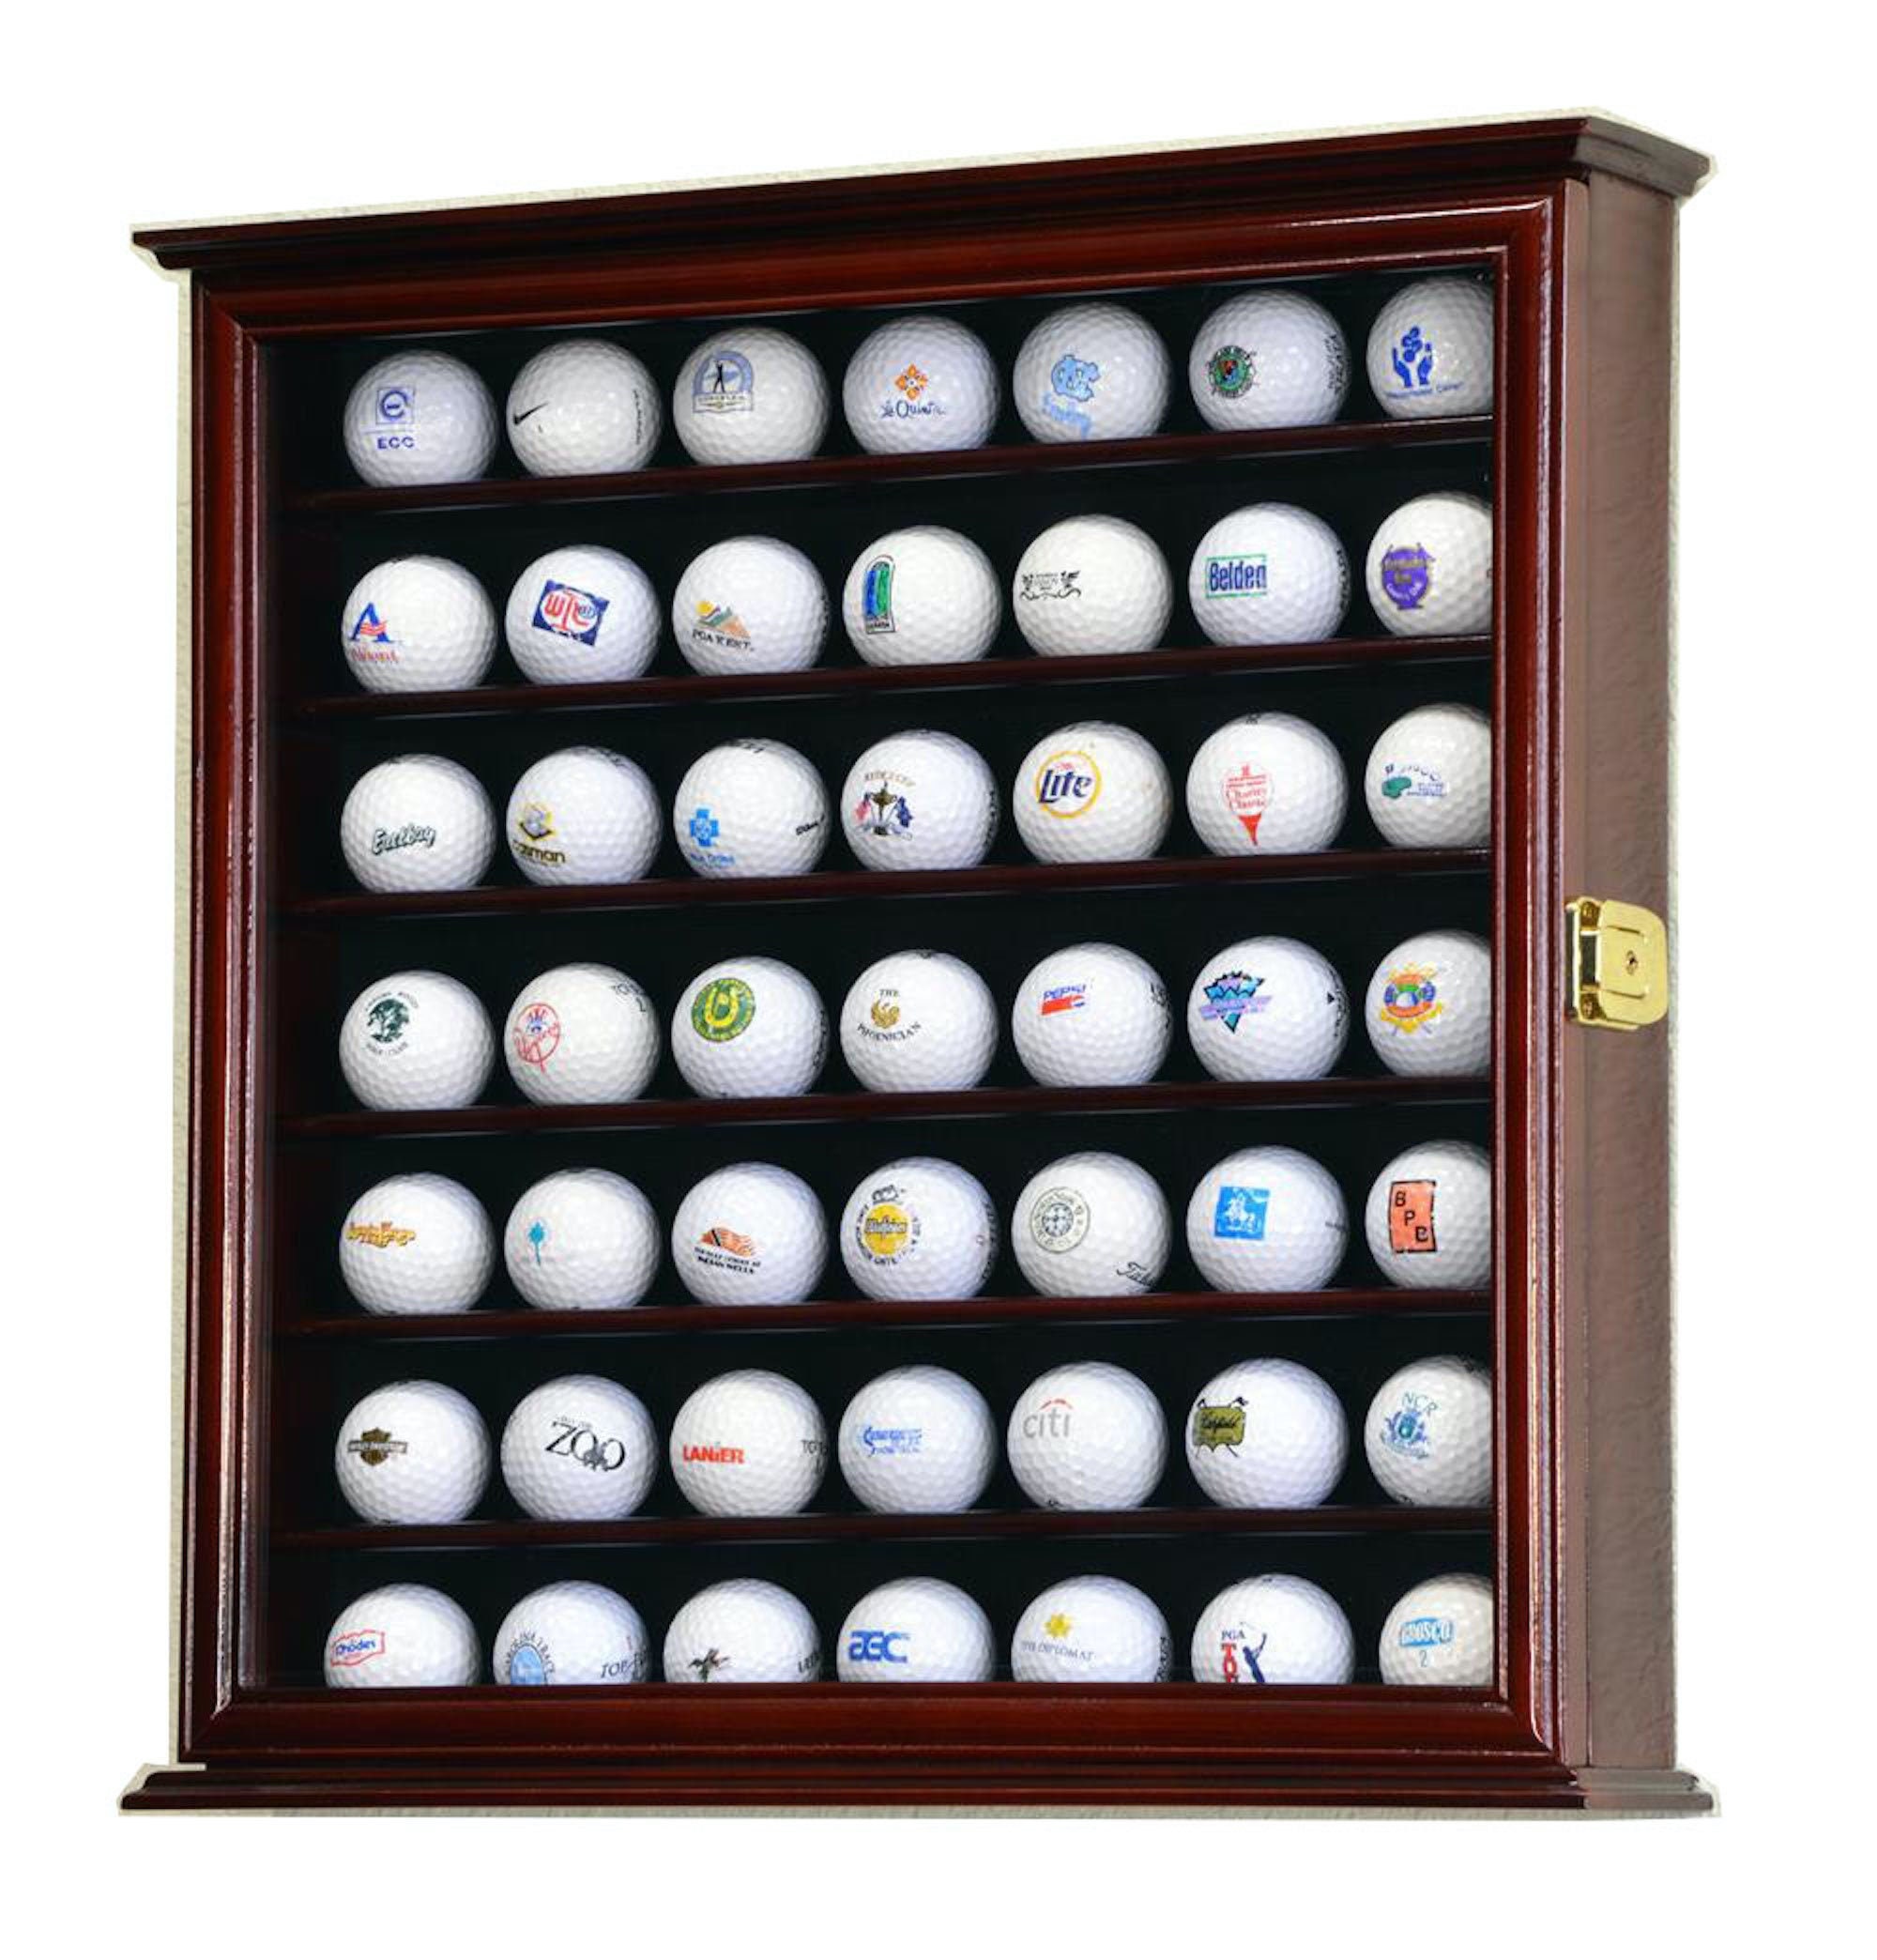 Lapel Pin Pins Display Case Cabinet Wall Rack Holder Disney Hard Rock  Military Pins Medals 